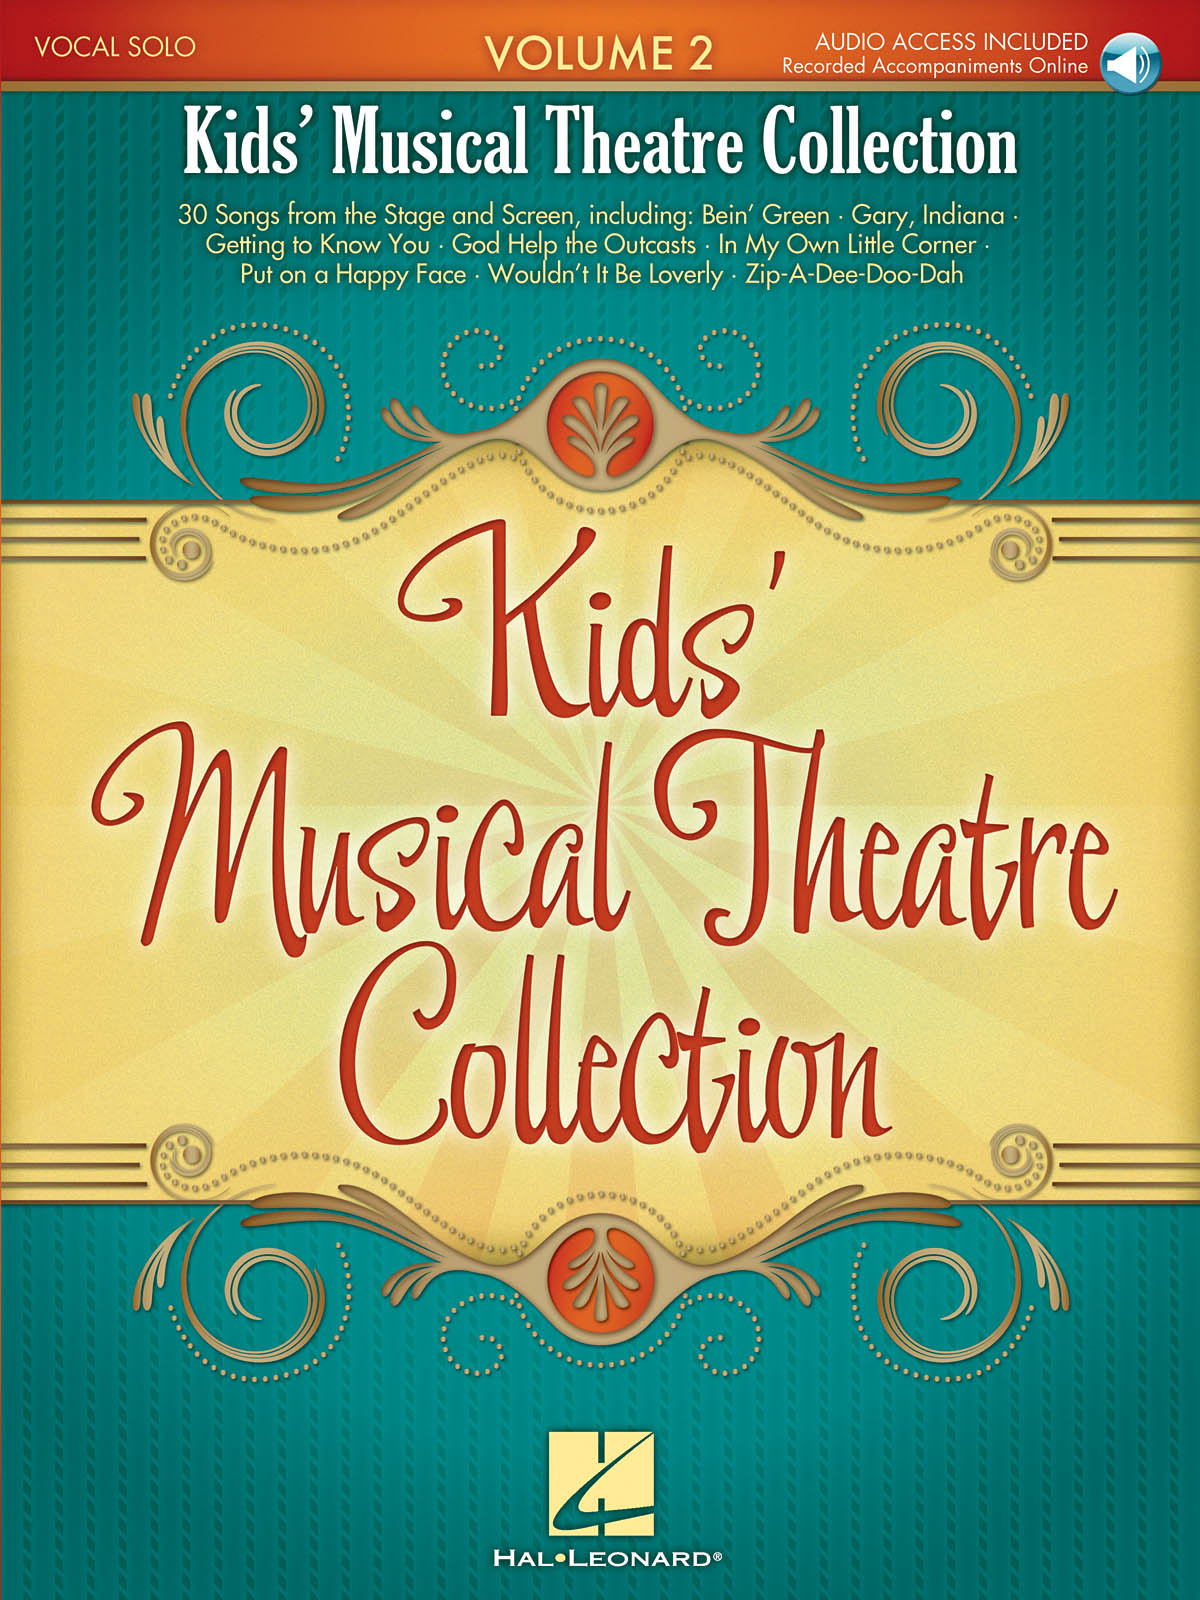 Kids' Musical Theatre Collection - Volume 2 - 30 Songs from the Stage and Screen, With Access to Online Audio of Piano Accompaniments - noty pro zpěv